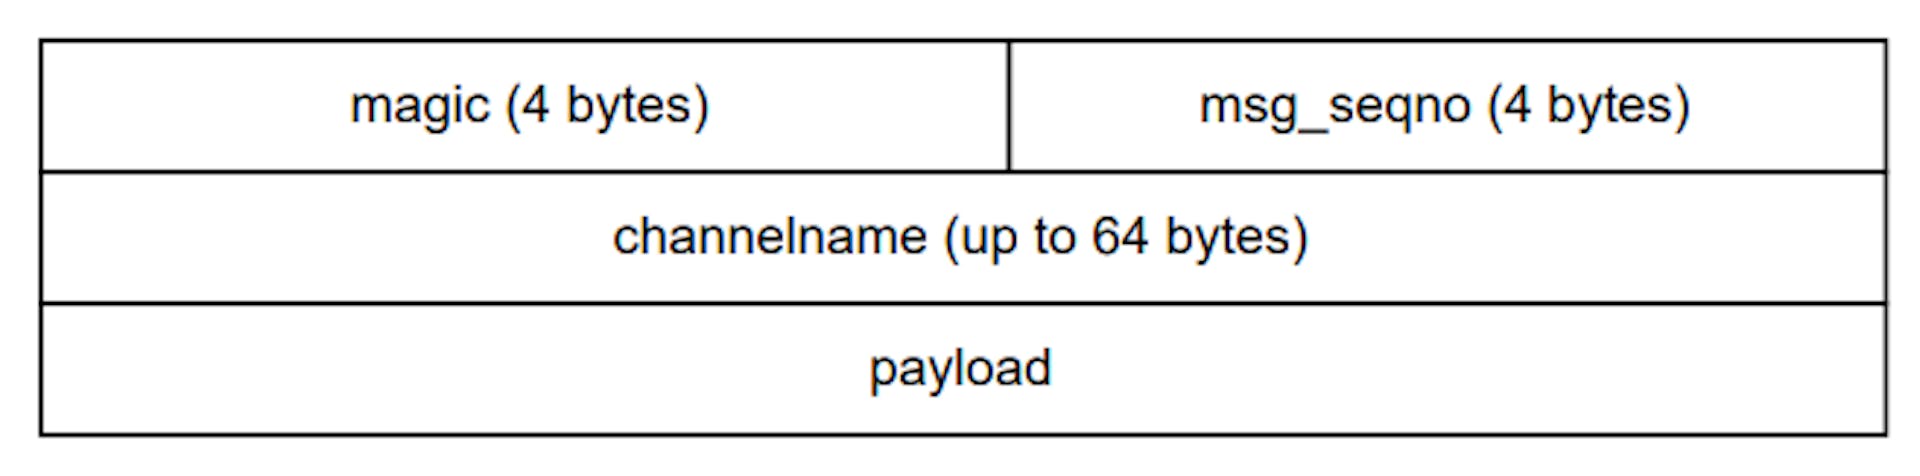 Fig. 2. LCM packet format